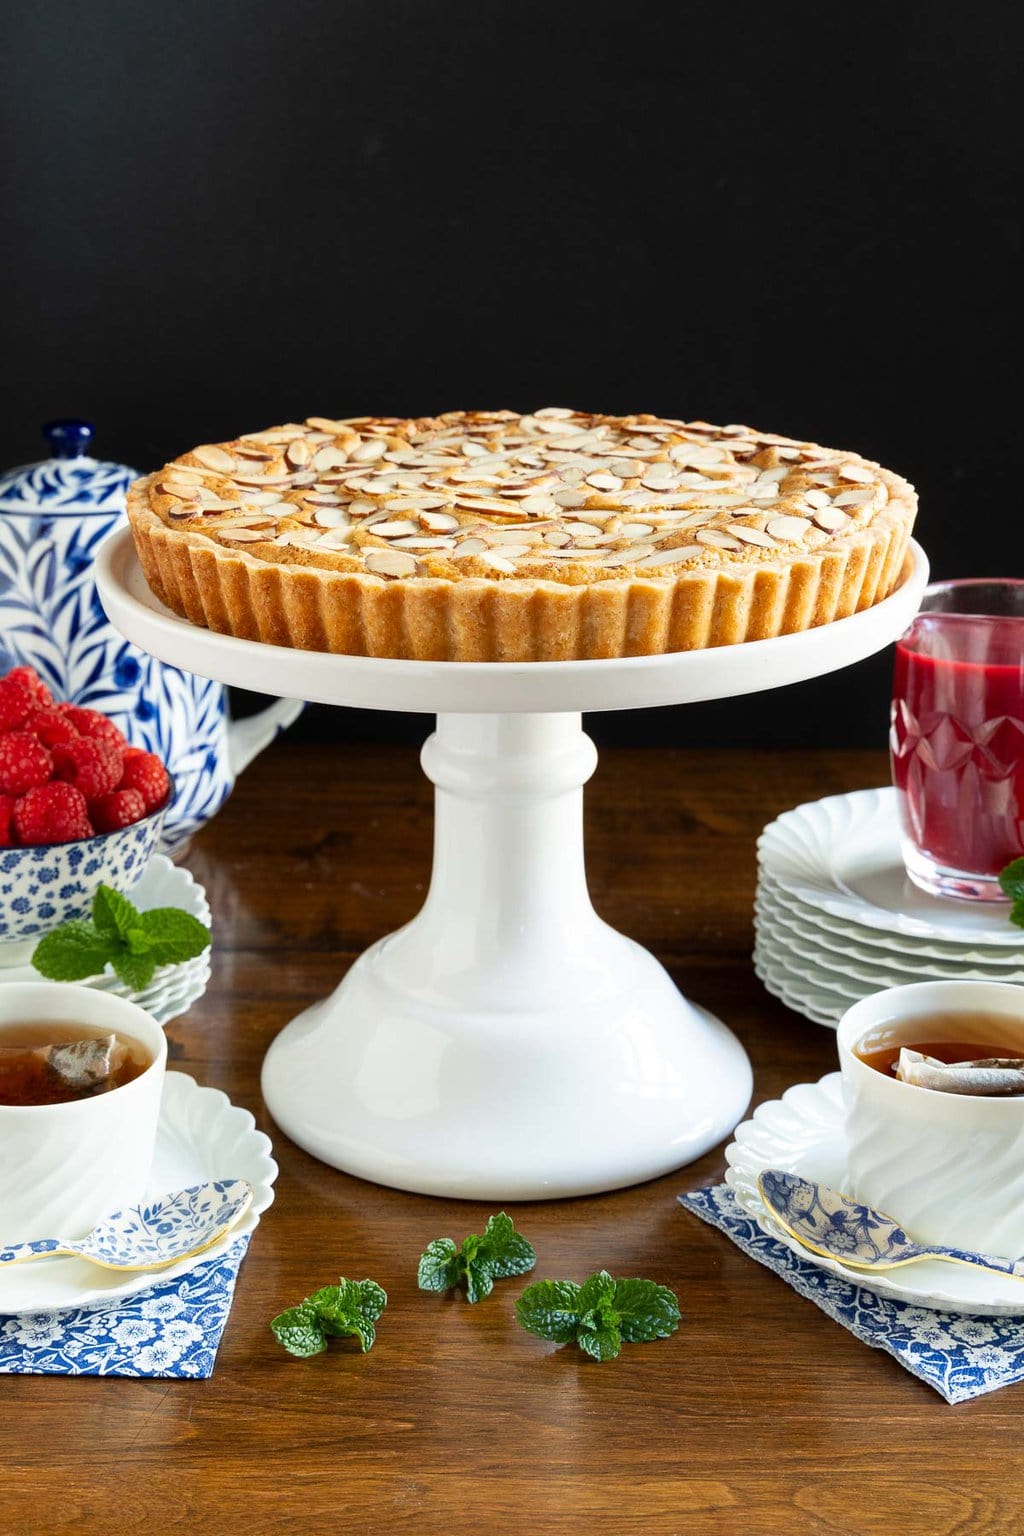 Vertical photo of a Ridiculously Easy French Almond Frangipane Tart on a white pedestal serving plate surrounded by raspberry coulis and cups of tea.